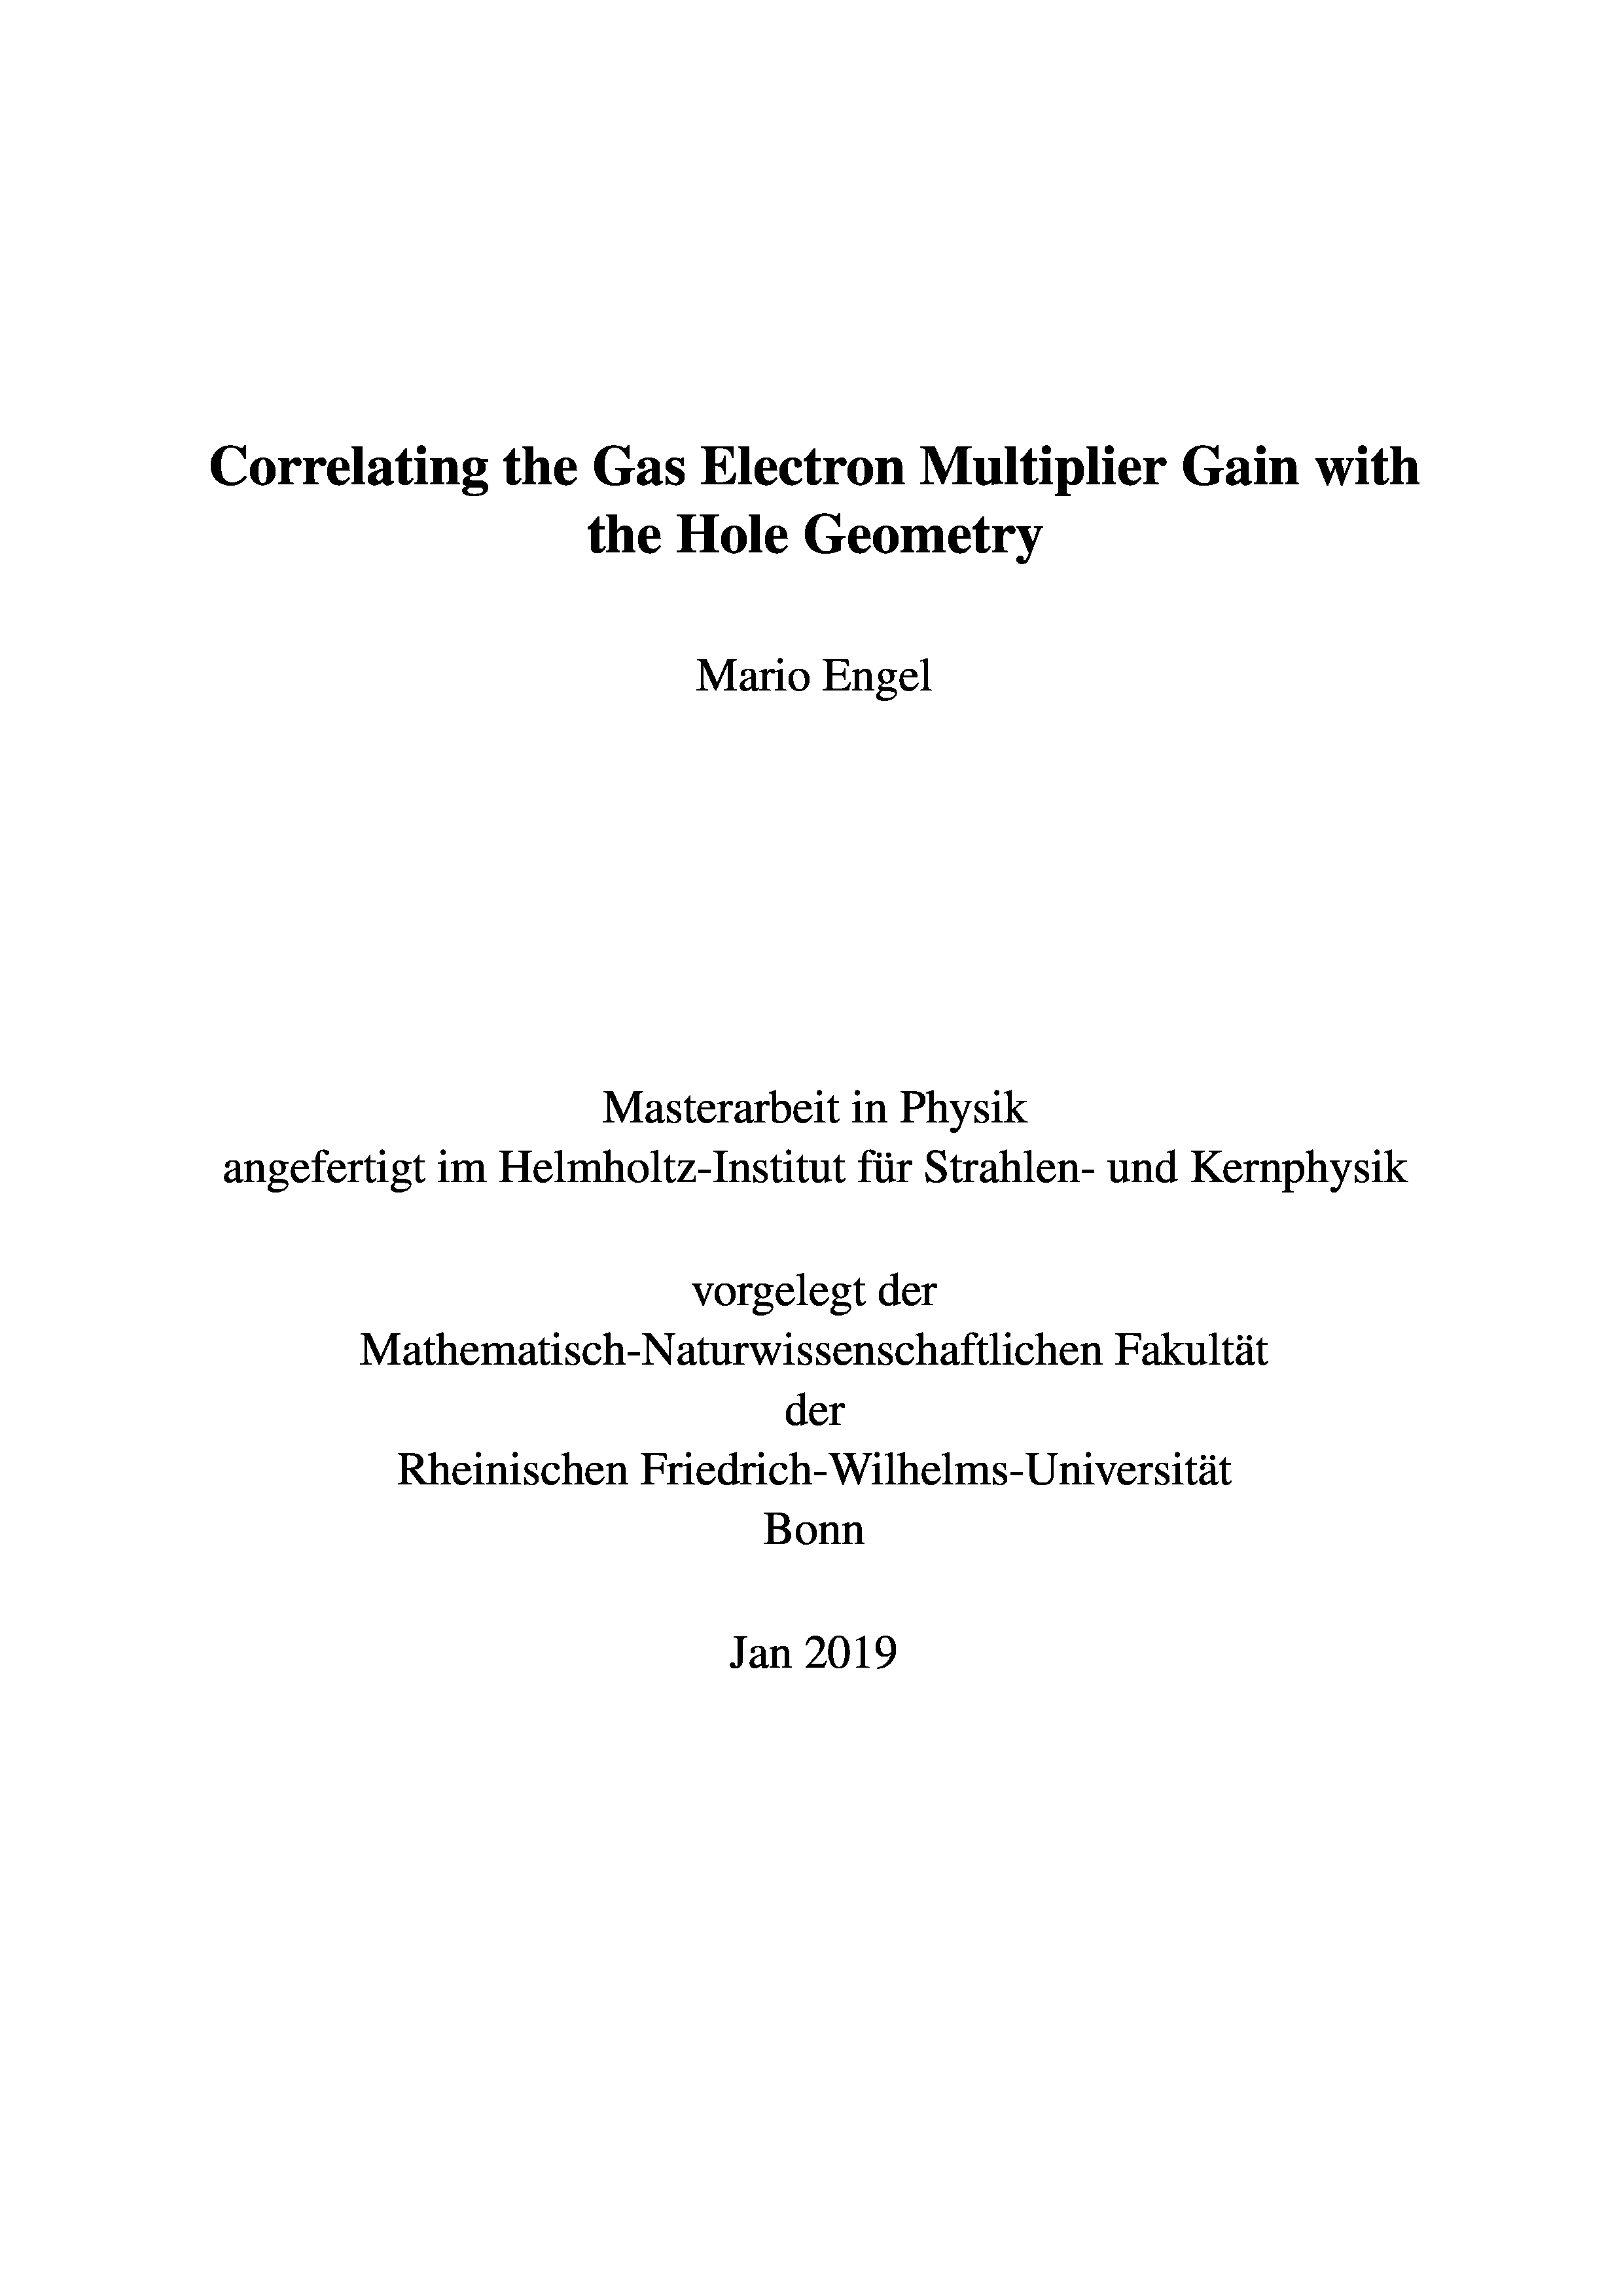 Correlating the Gas Electron Multiplier Gain with the Hole Geometry